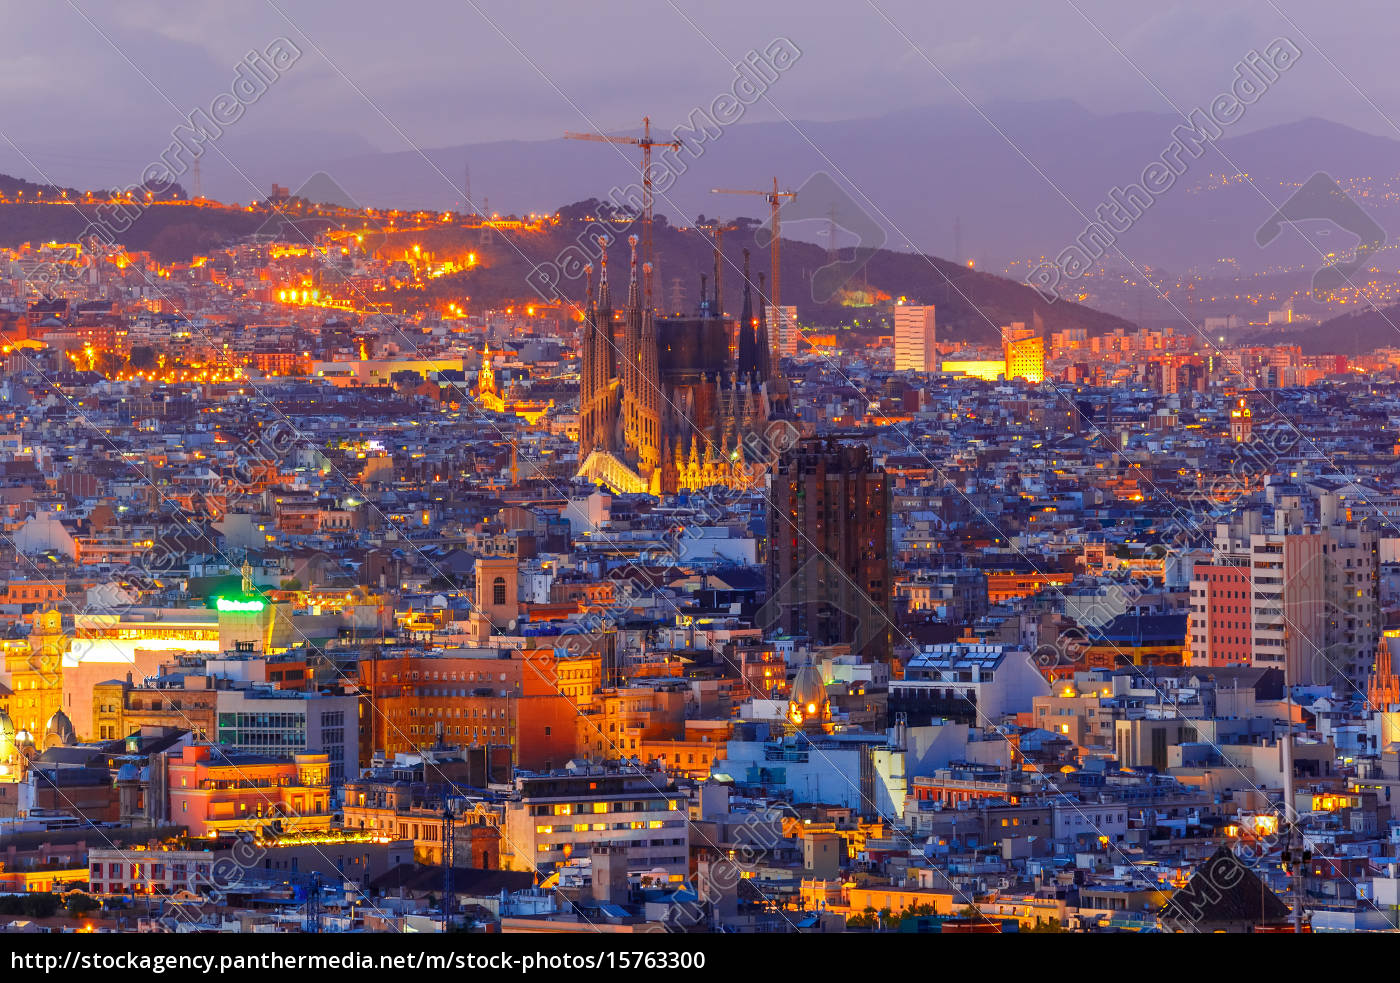 Aerial View Barcelona At Night Catalonia Spain Royalty Free Photo 15763300 Panthermedia Stock Agency royalty free photo 15763300 aerial view barcelona at night